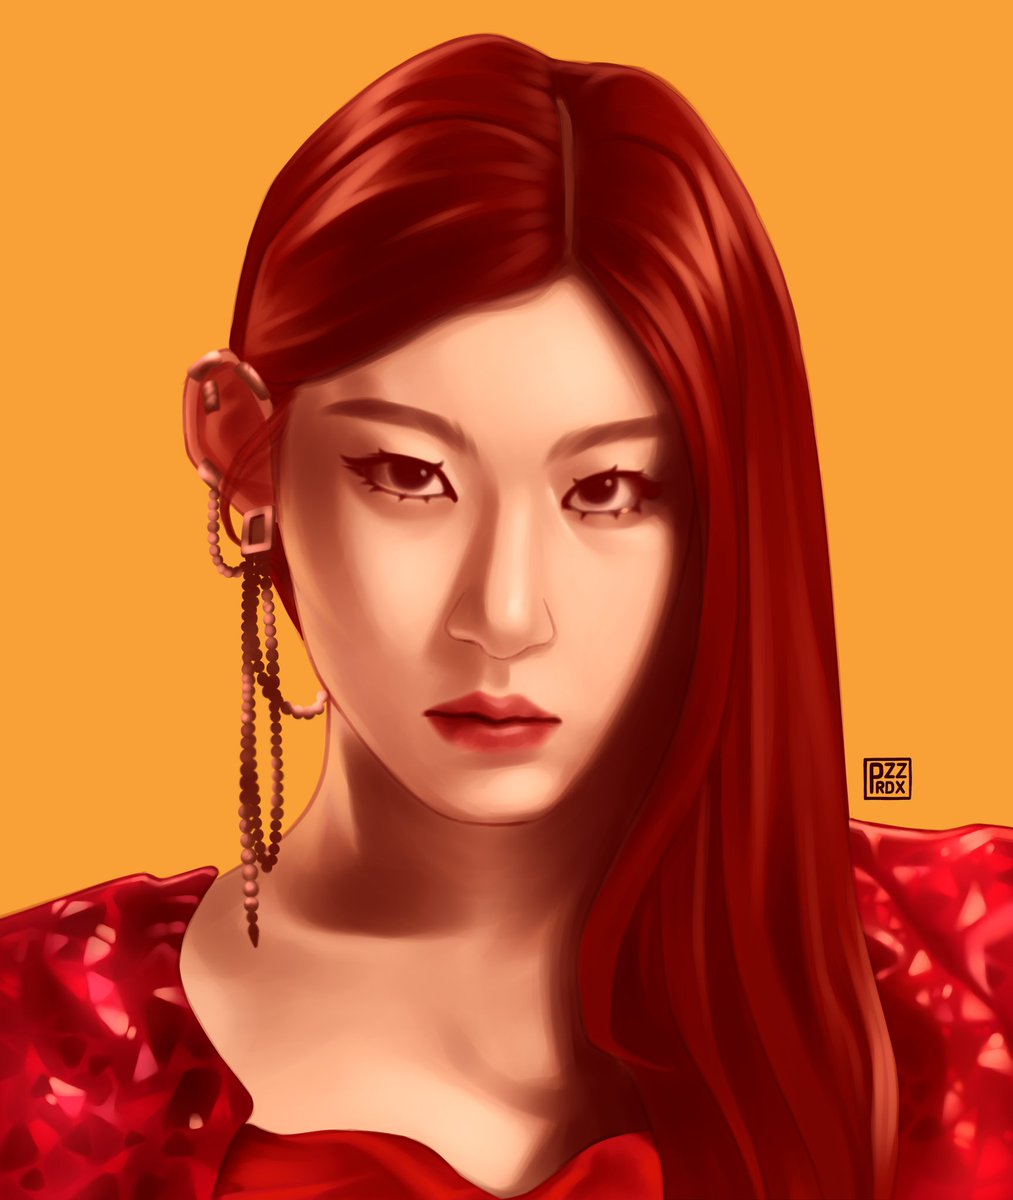 MITM Chaeryoeng redraw after a year💛
#ITZY #CHAERYEONG #itzyFanart #InTheMorning #Redraw